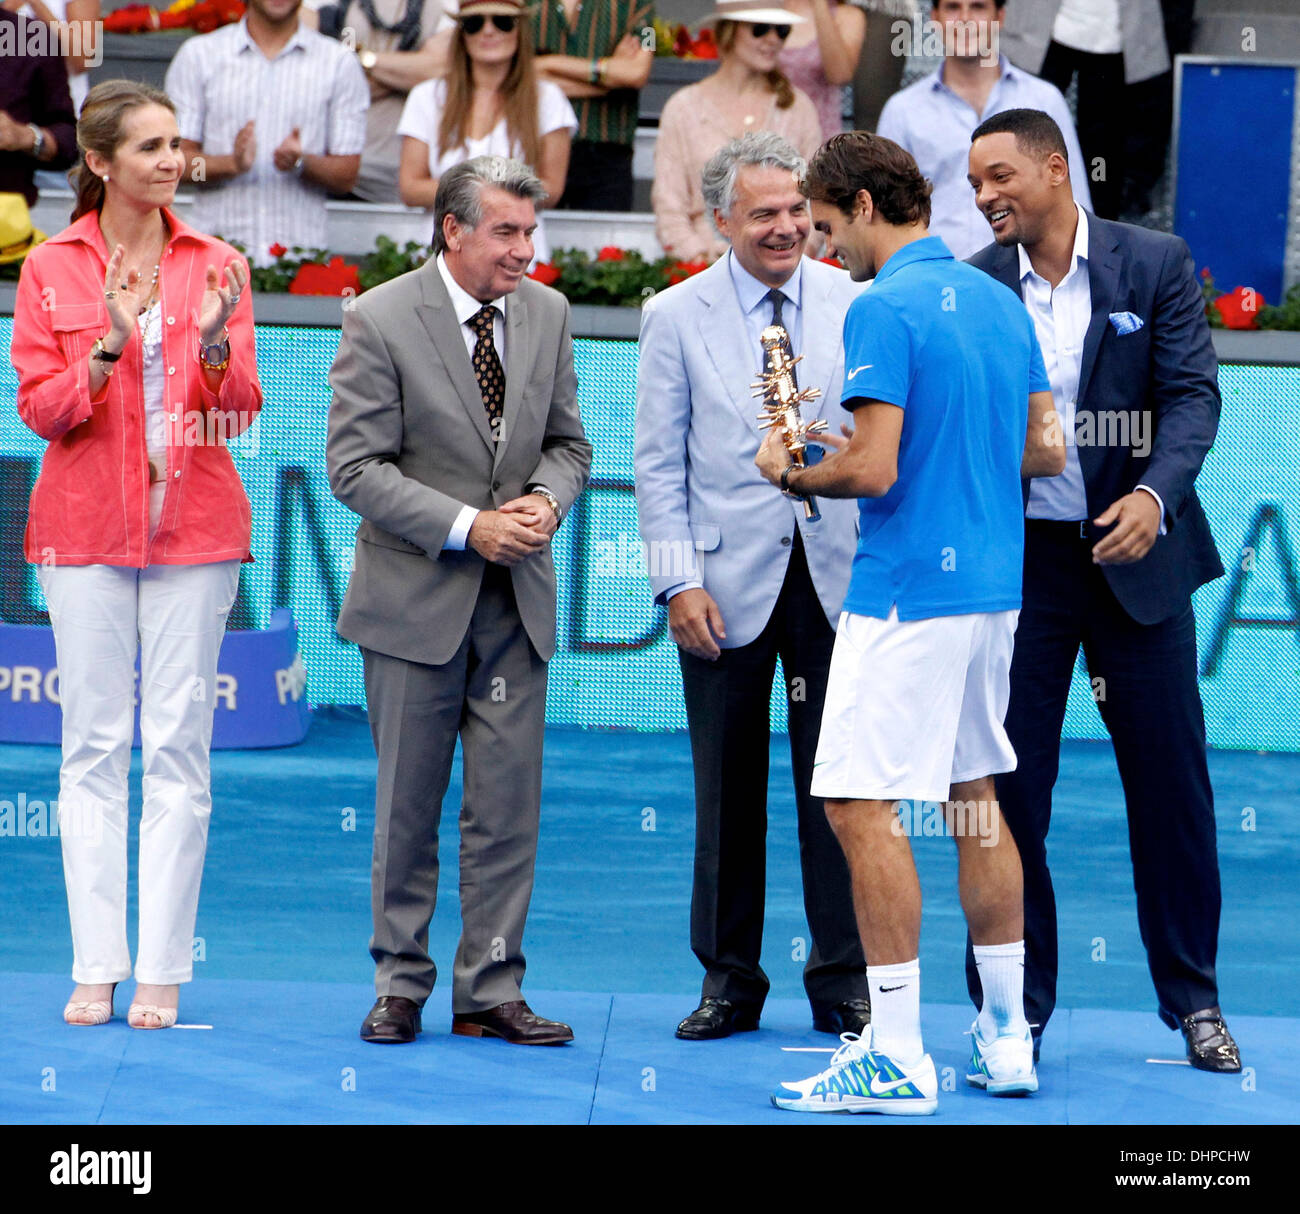 Will Smith and Roger Federer Roger Federer receives his trophy after winning the the final match of the Madrid Masters against Czech Tomas Berdych a at the Magic Box (Caja Magica) sports complex  Madrid, Spain - 13.05.12 Stock Photo